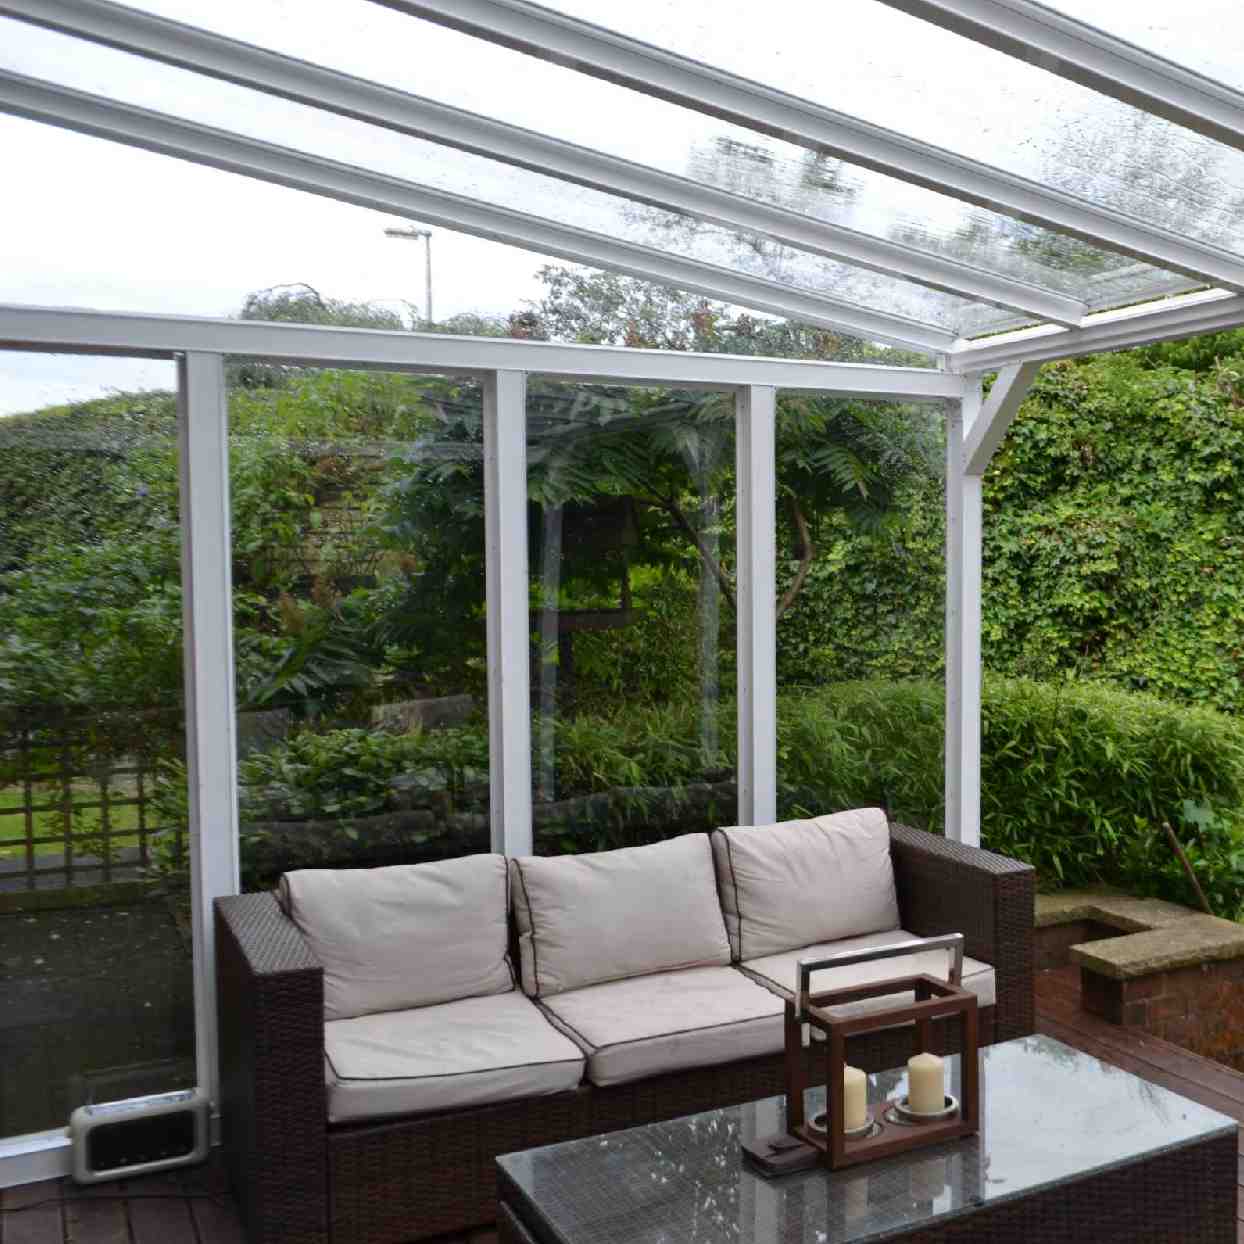 Buy Omega Verandah White with 16mm Polycarbonate Glazing - 10.6m (W) x 2.5m (P), (5) Supporting Posts online today